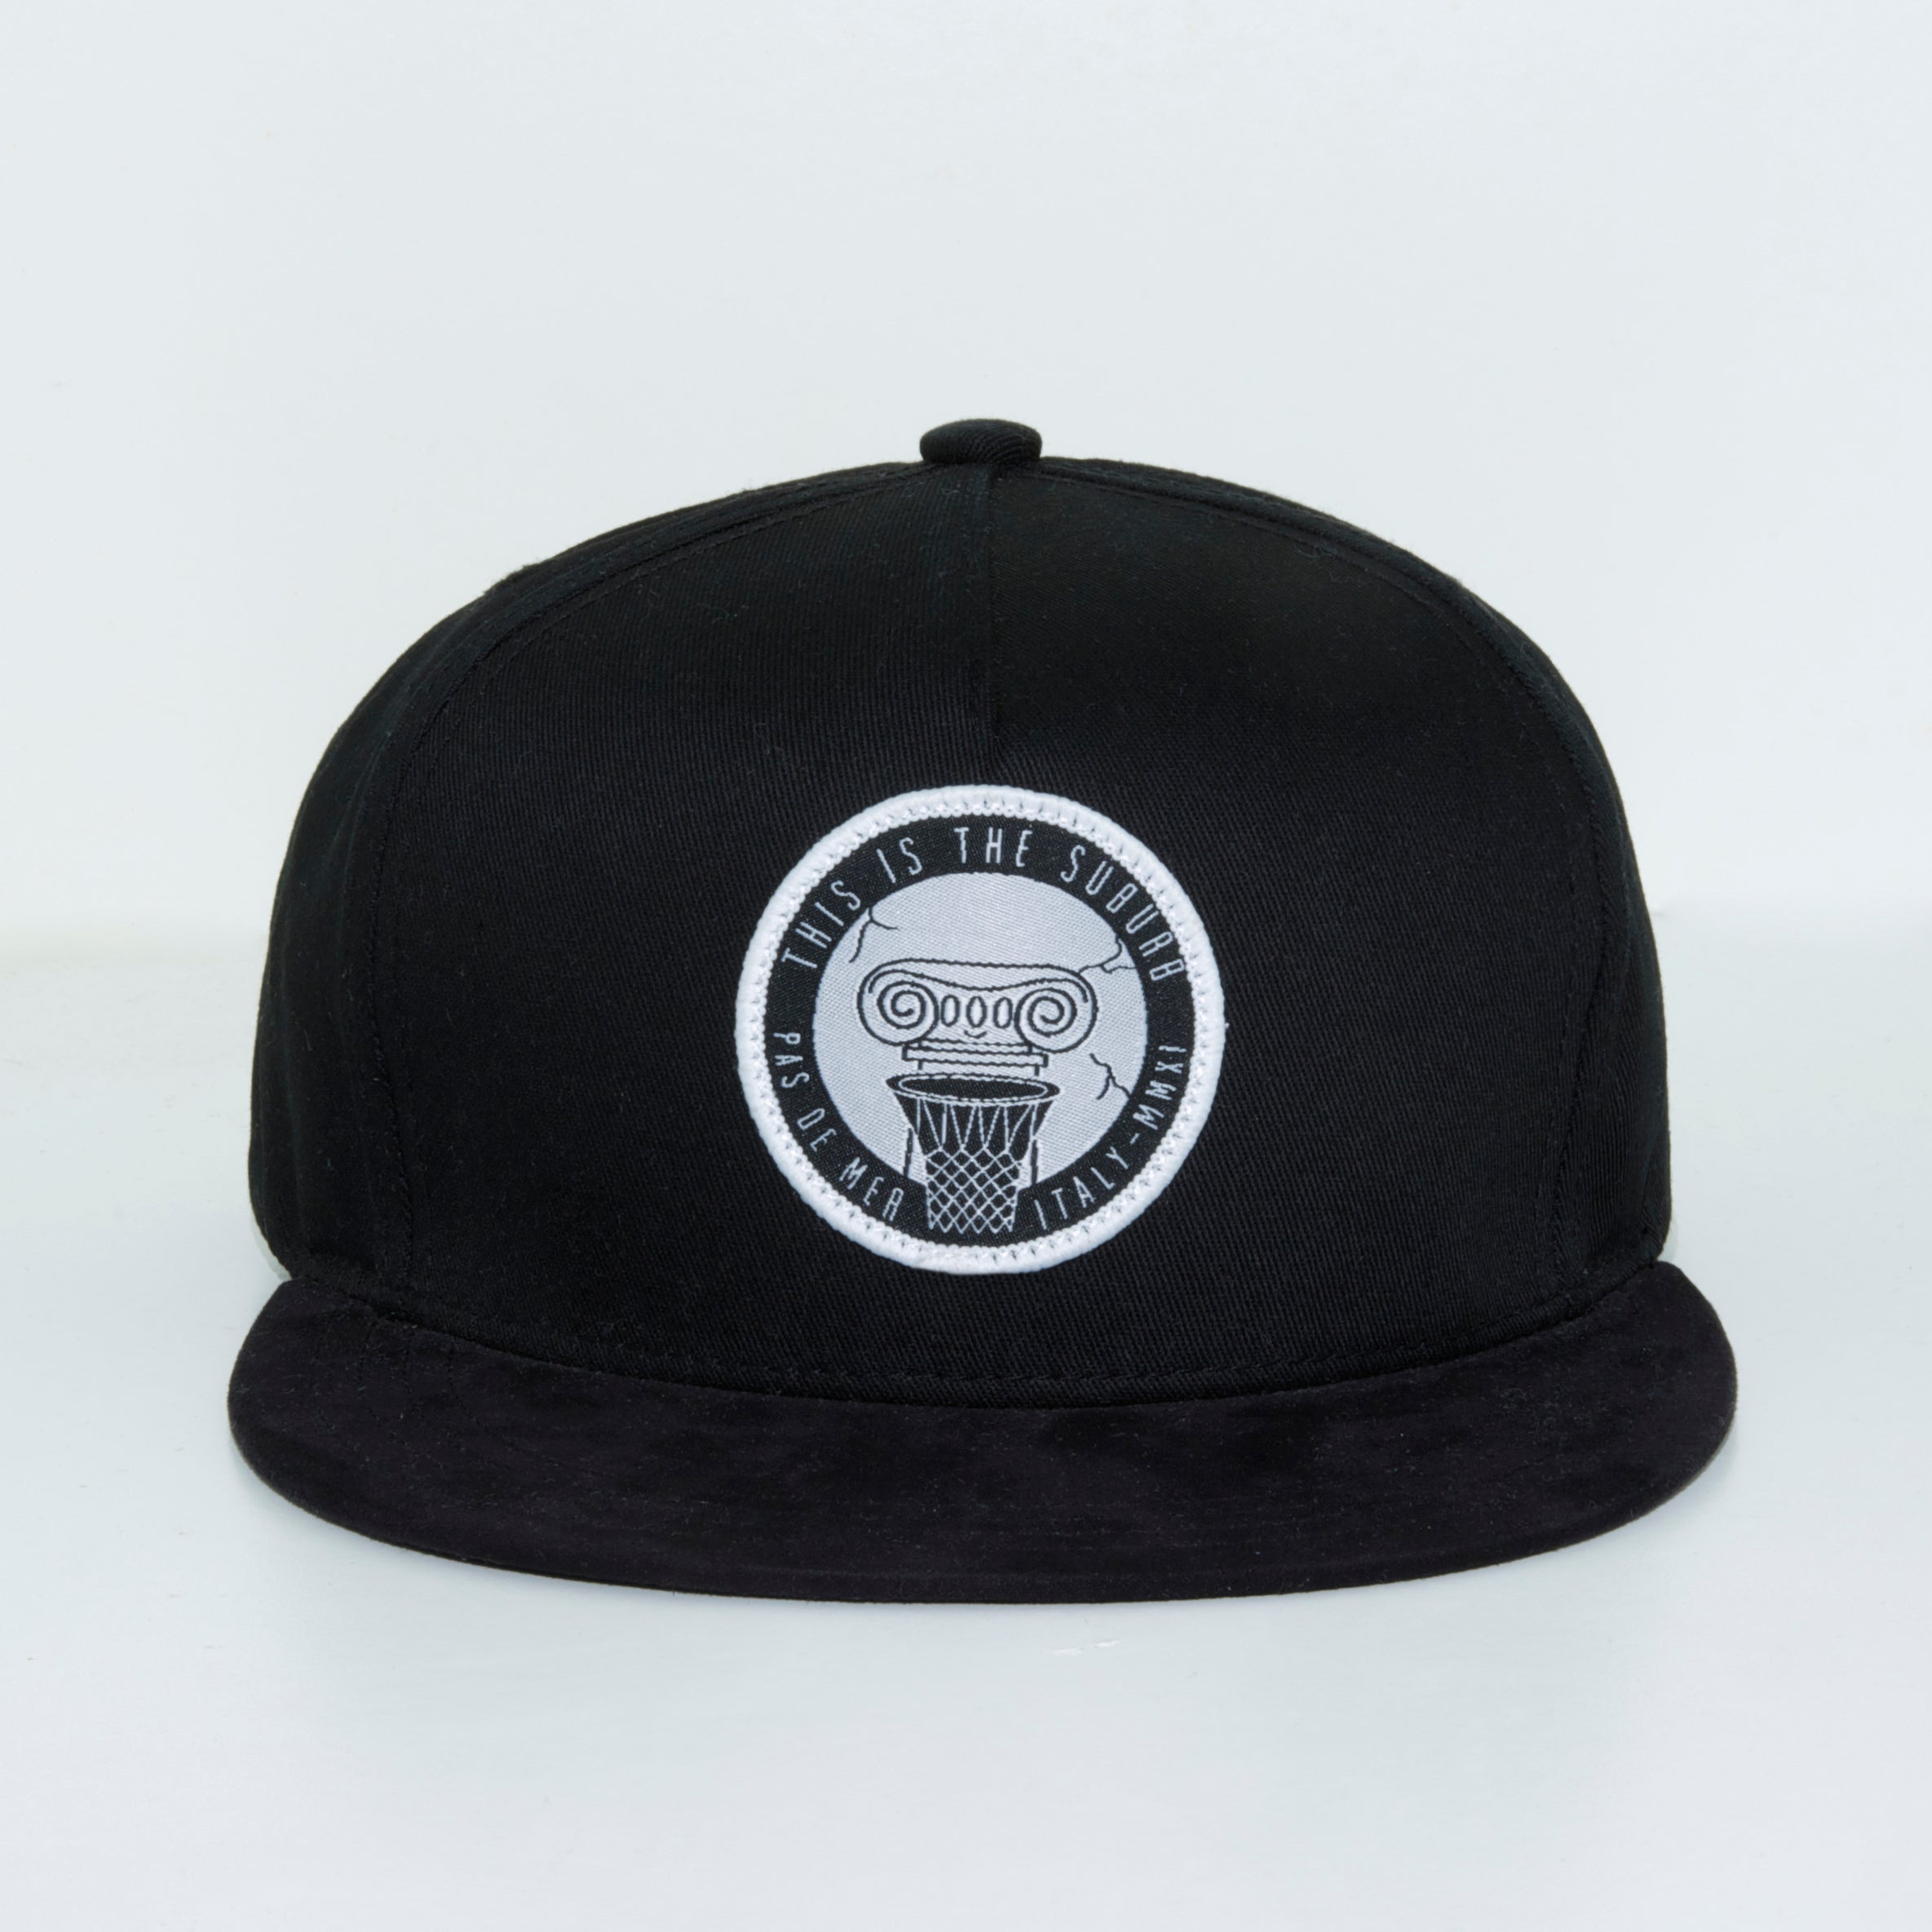 This is the Suburb Snapback